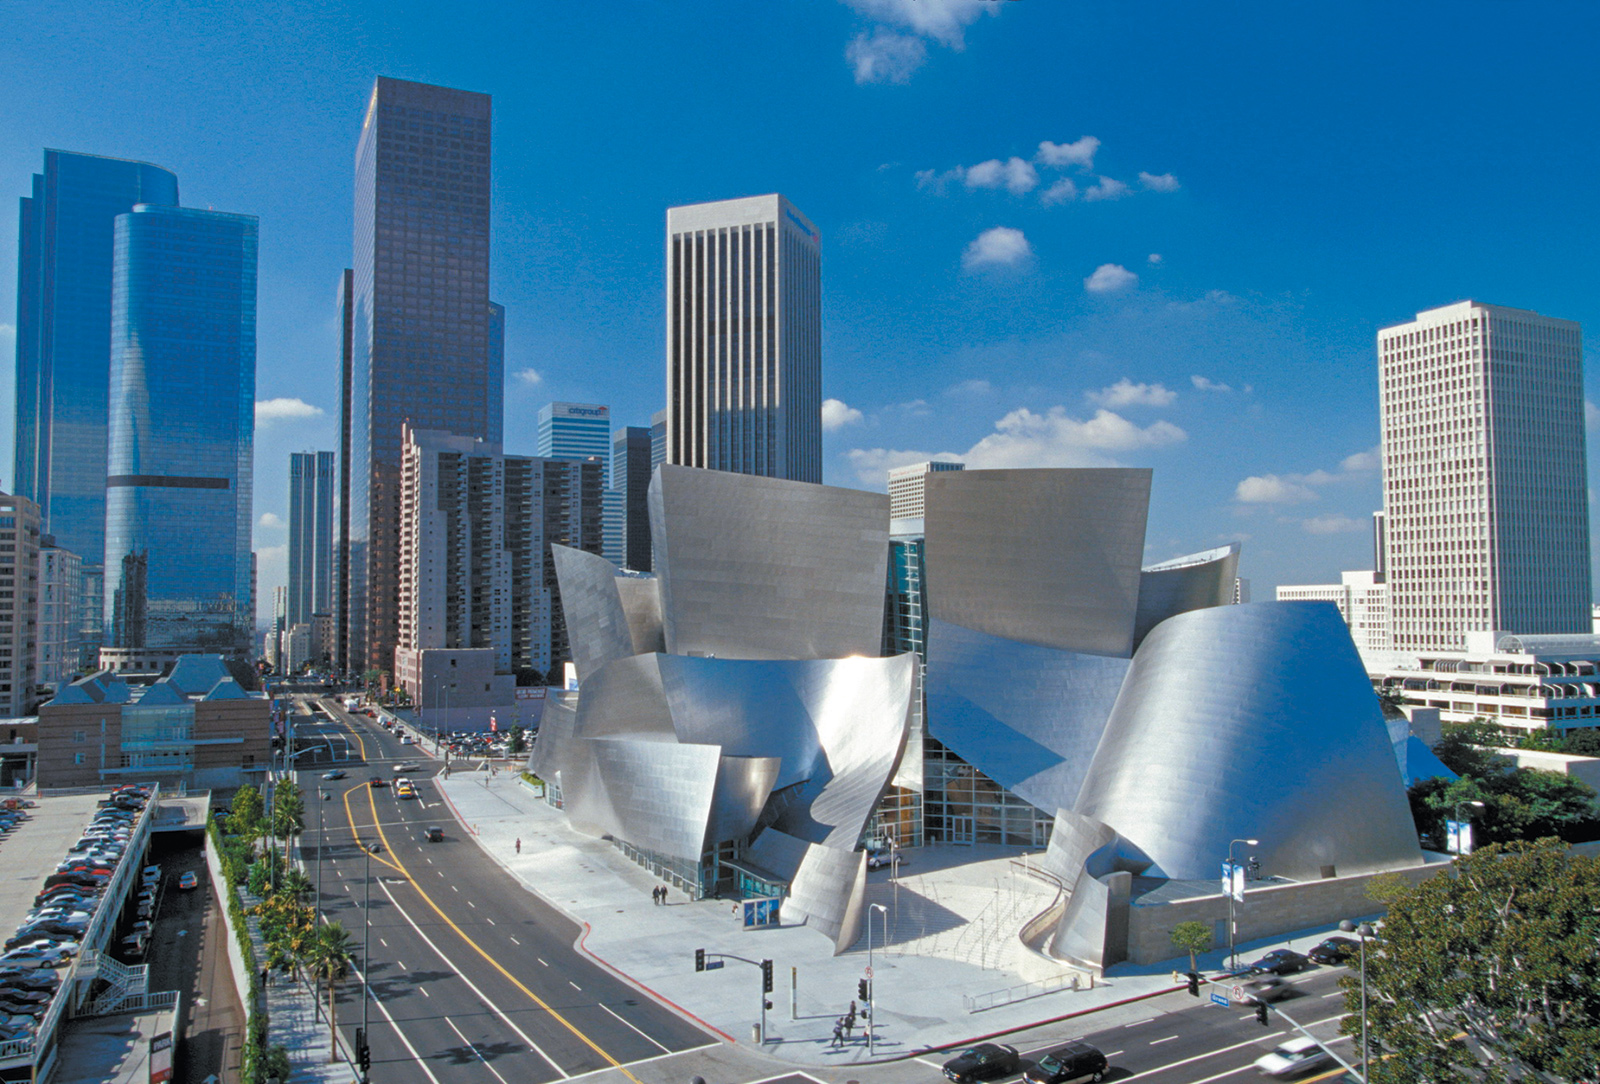 The Walt Disney Concert Hall in Los Angeles, designed by Frank Gehry